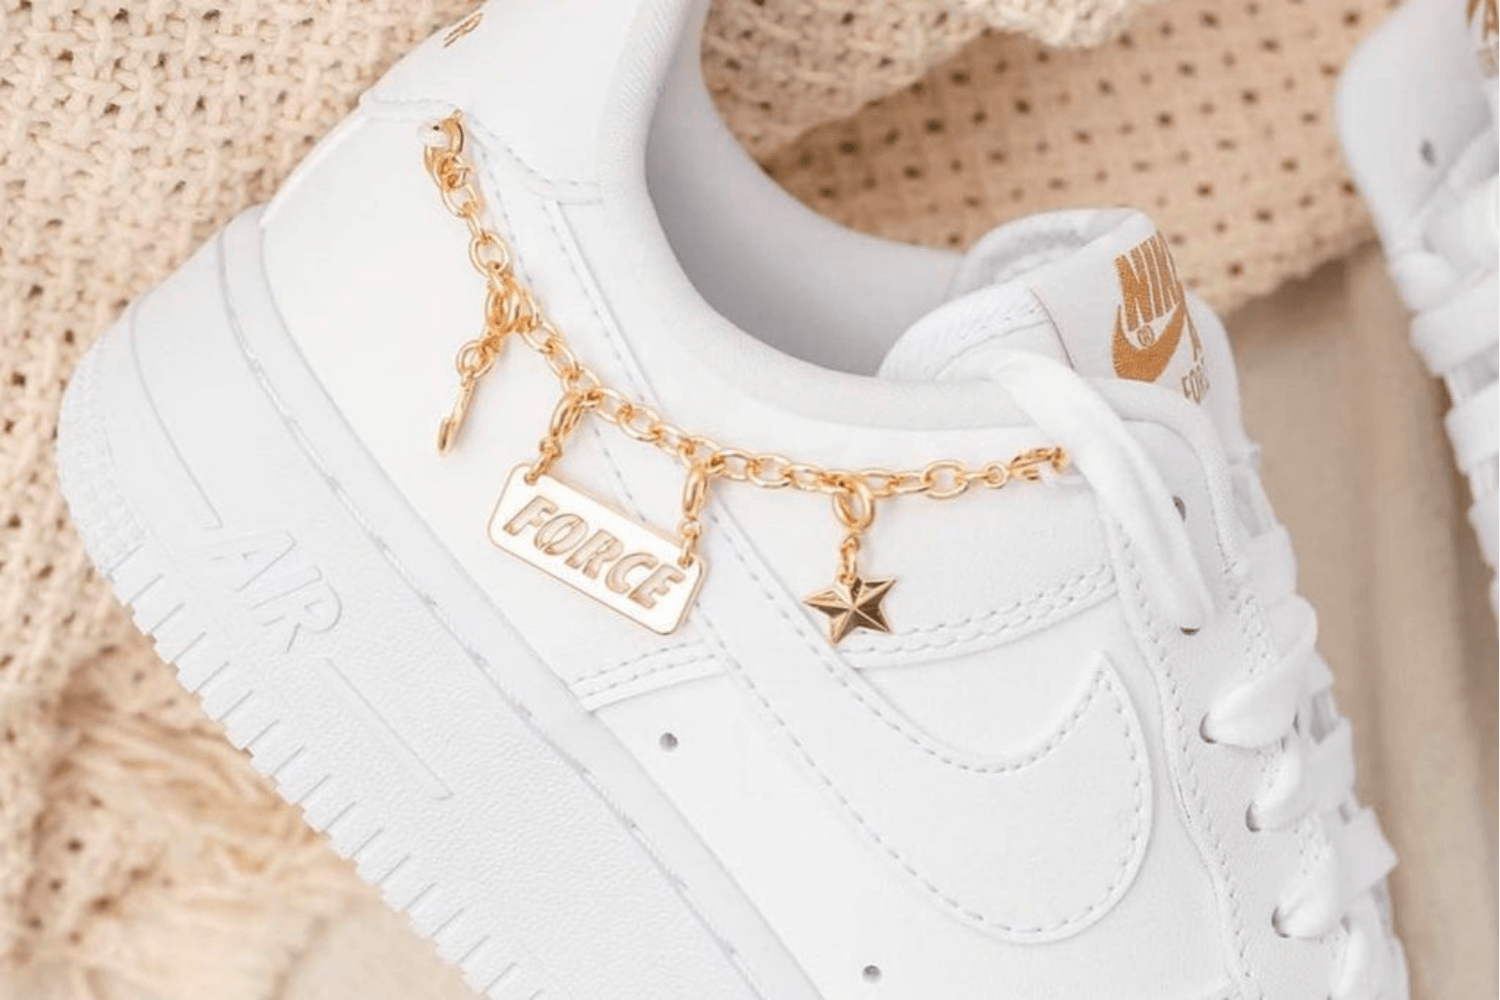 Release Reminder: Nike WMNS Air Force 1 ’07 LX ‘Lucky Charms’